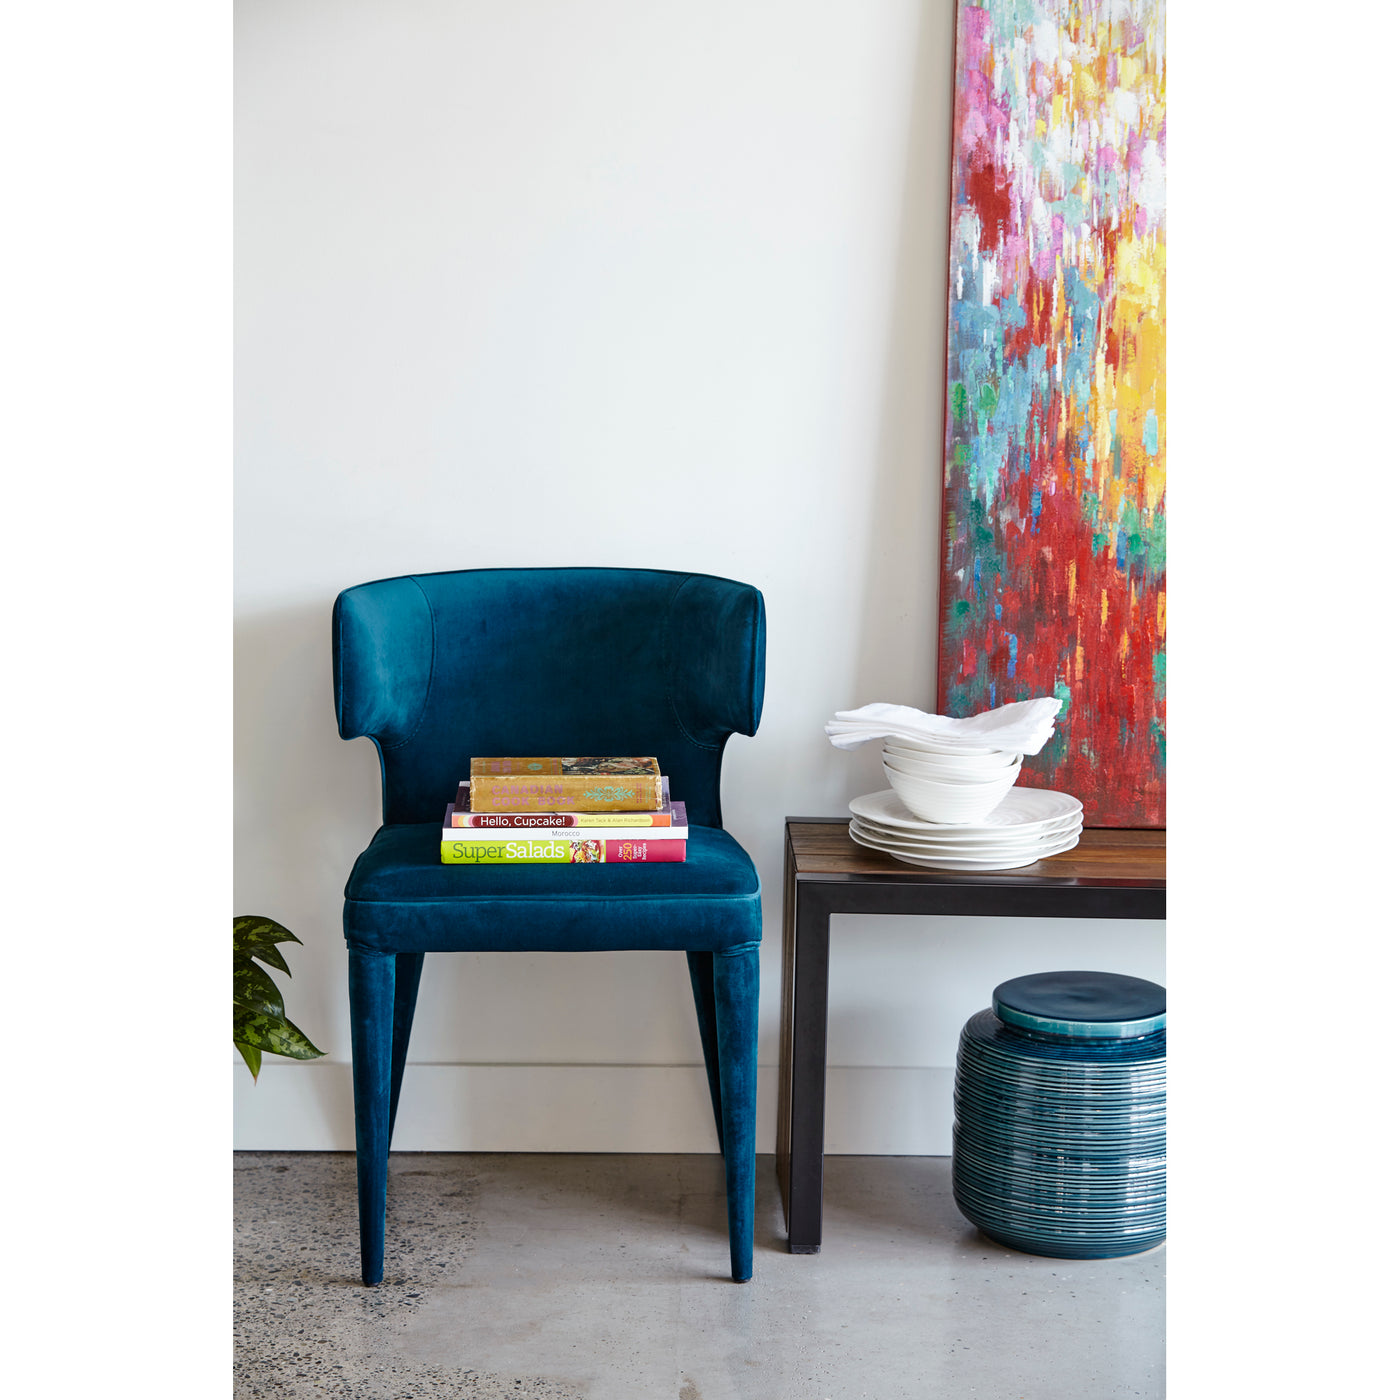 With an elegant, hourglass figure and a stunning teal, polyester-velvet upholstery, this is the perfect chair to add a pun...